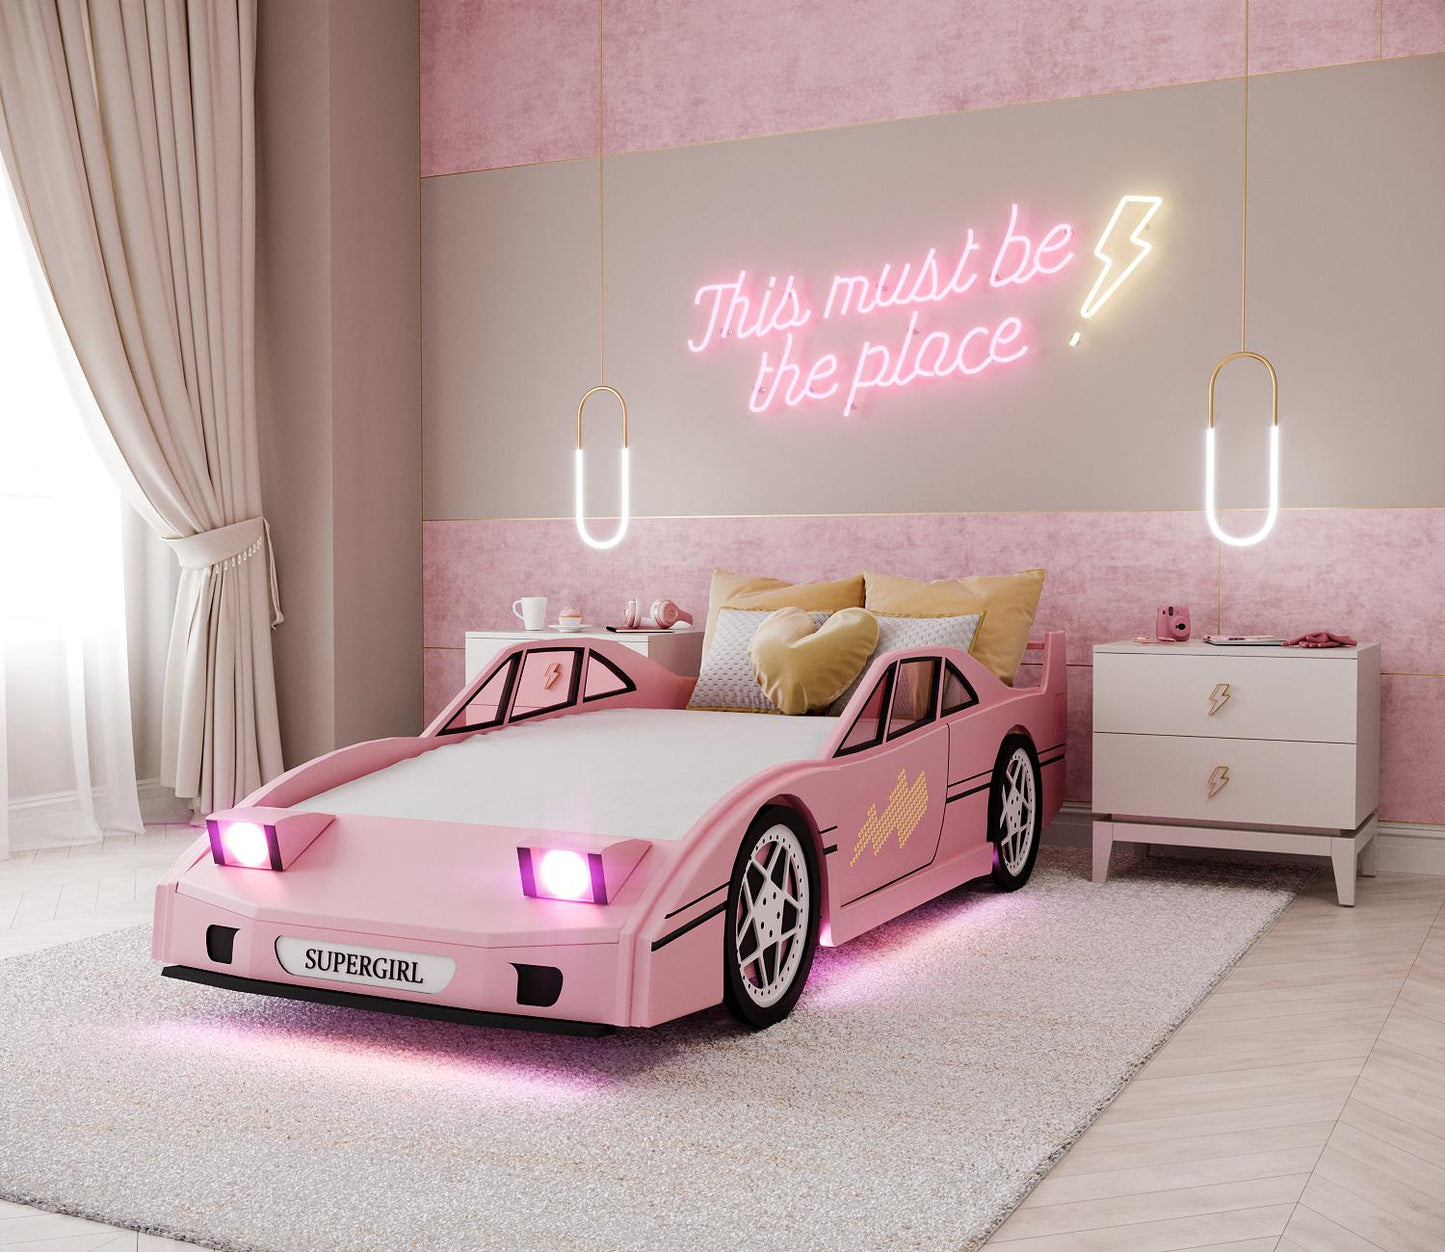 Wooden race car bed | Girl's pink racing car bed | Dragons of Walton Street